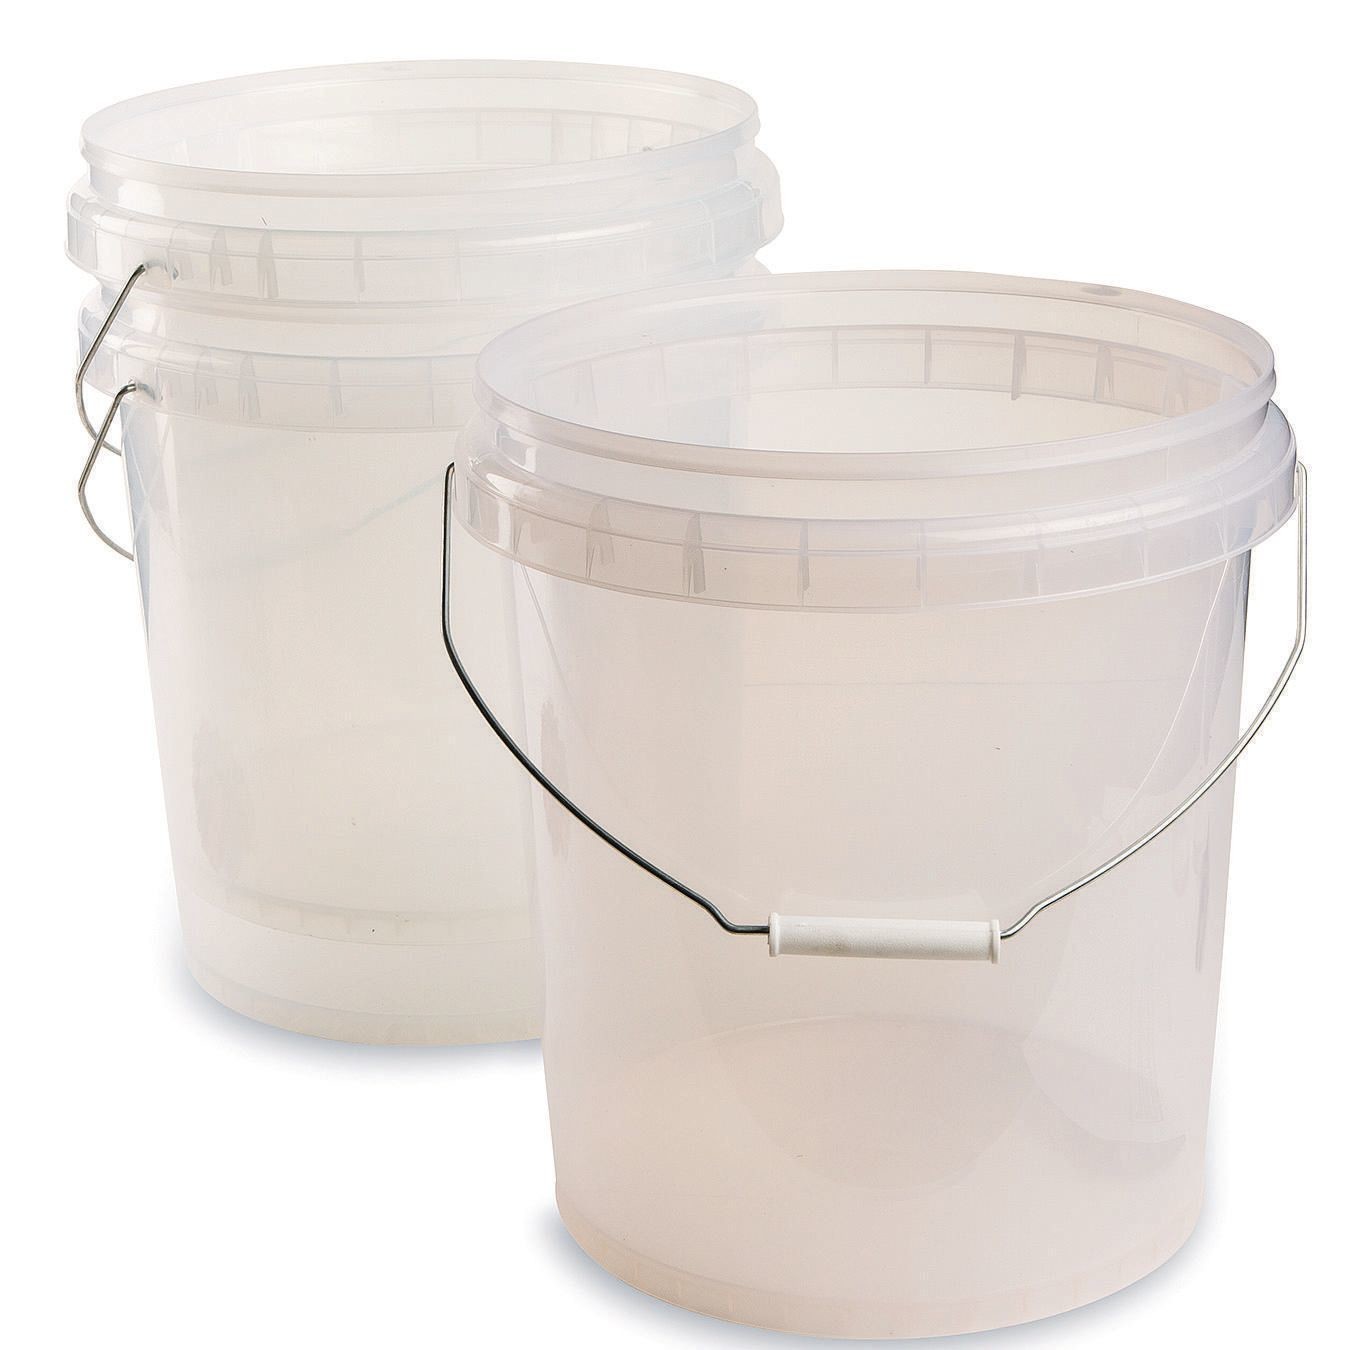 3-3/4 Gallon Clear Buckets (Pack of 3) from S&S Worldwide